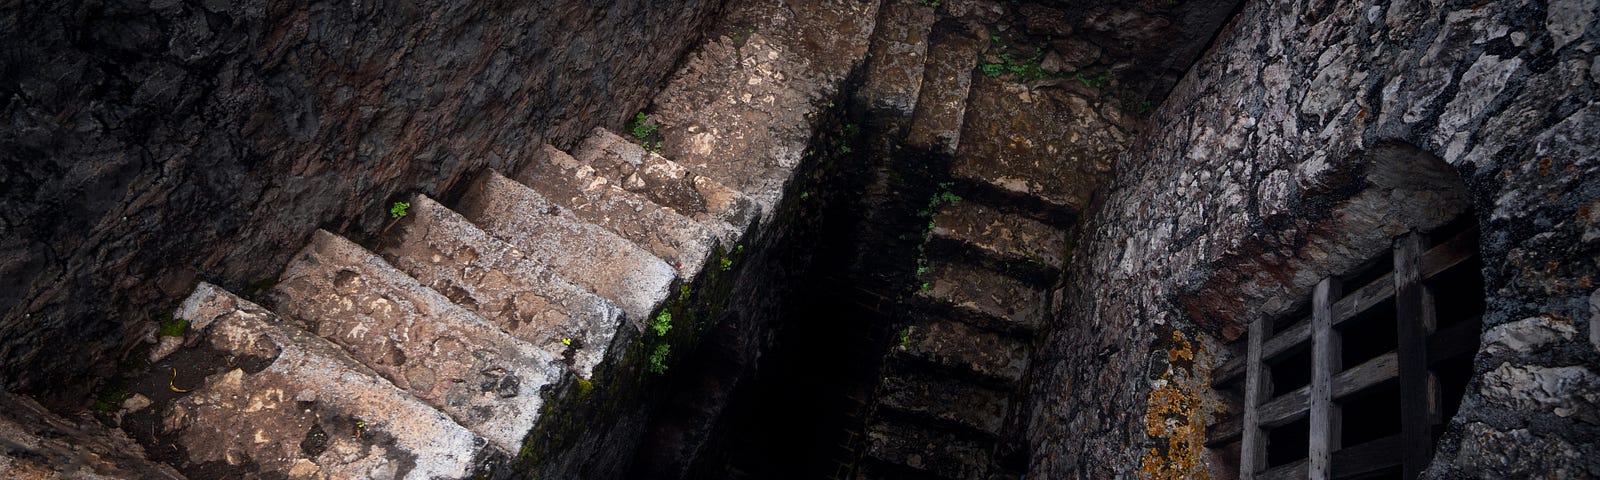 An old, stone staircase goes down past a window covered with iron bars into the darkness of an ancient prison.